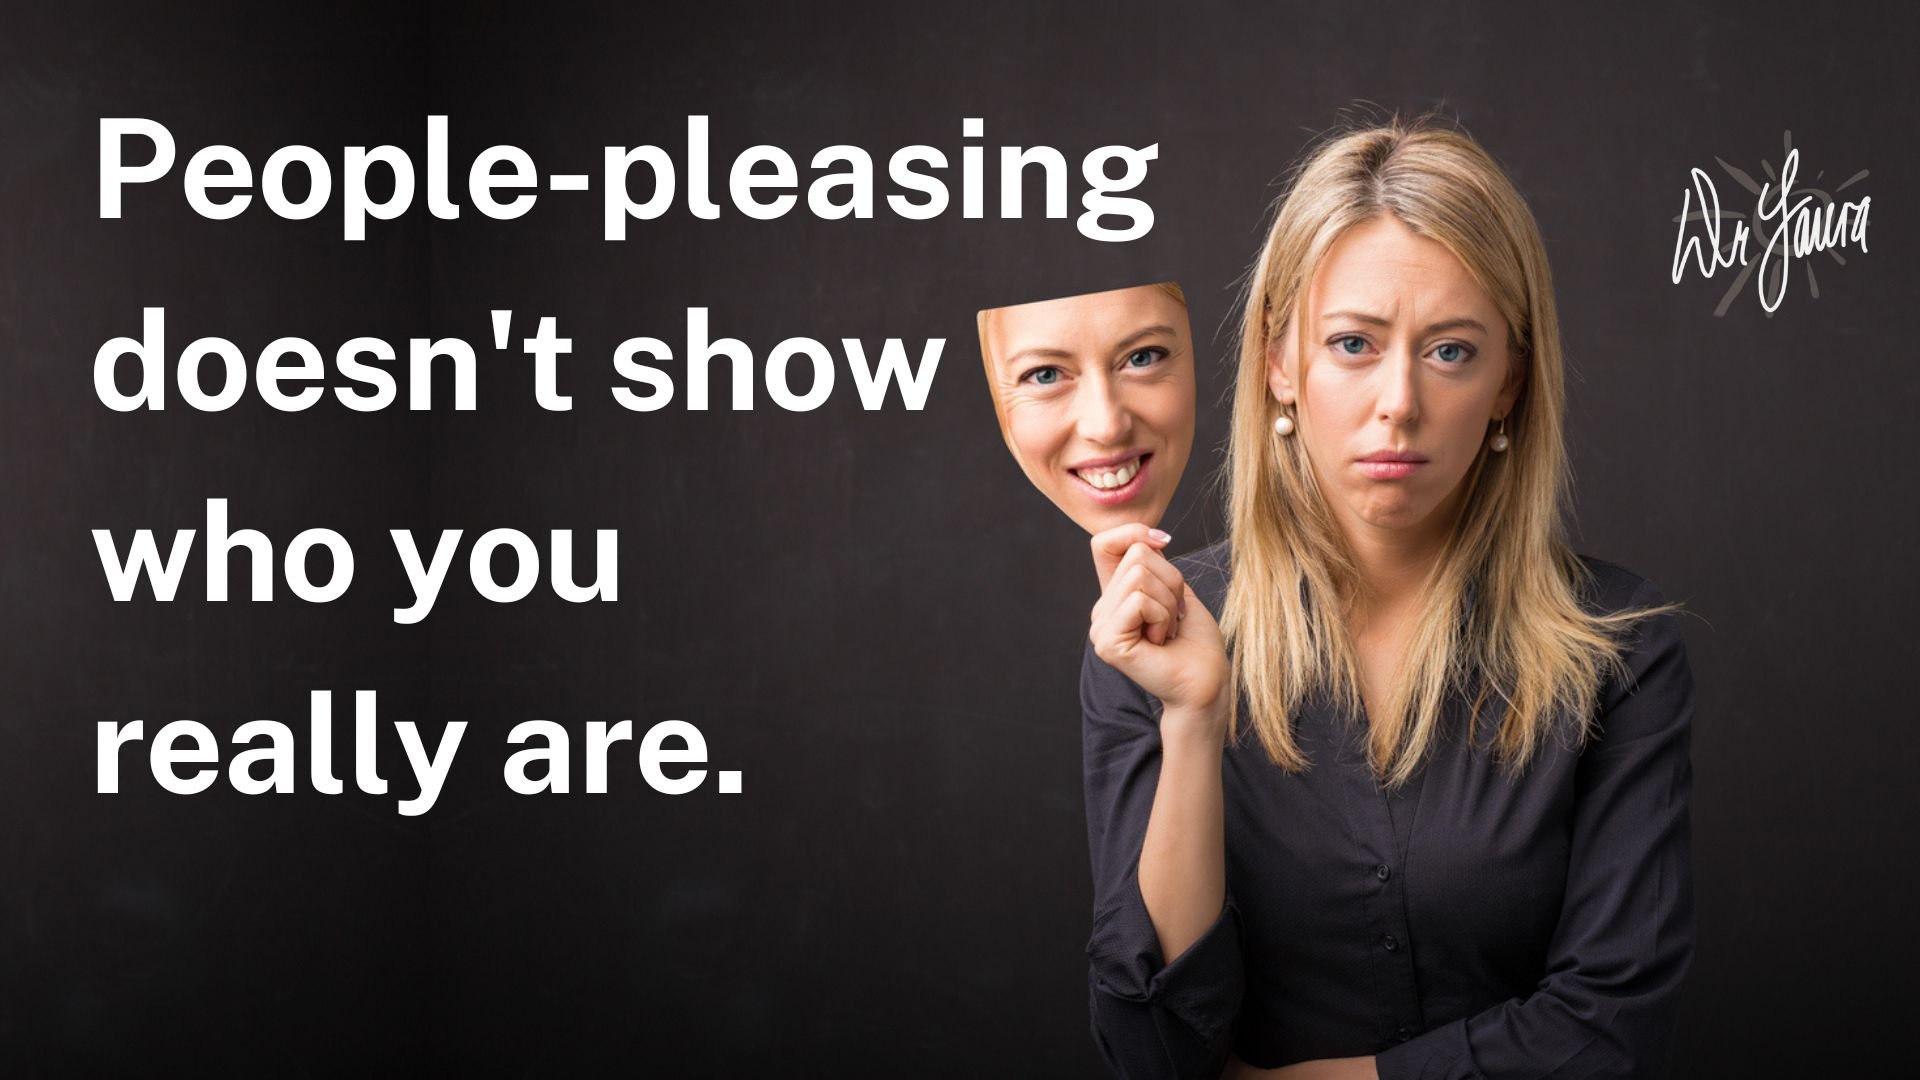 Blog: Why You Shouldn't Be a People-Pleaser